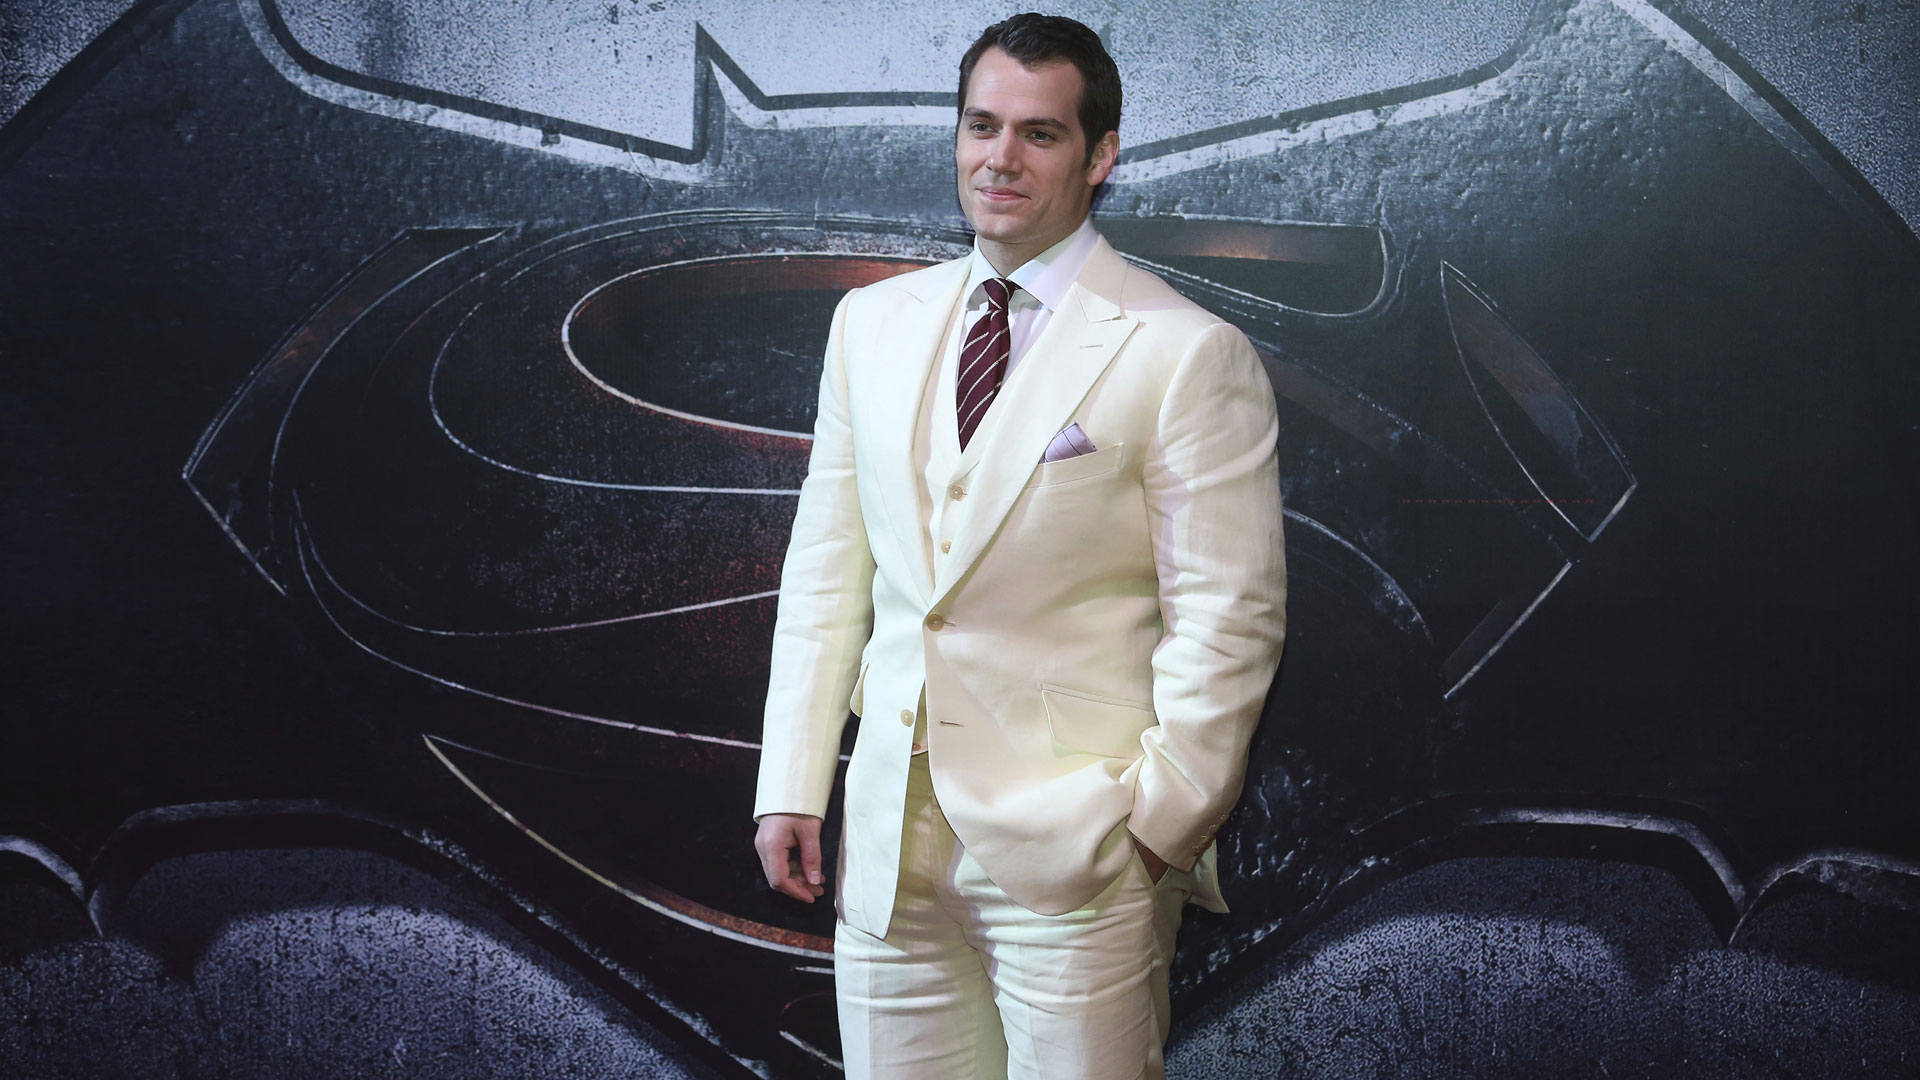 As we've all heard at this point, Henry Cavill is coming back as supes.  What are all of your opinions on this? : r/superman